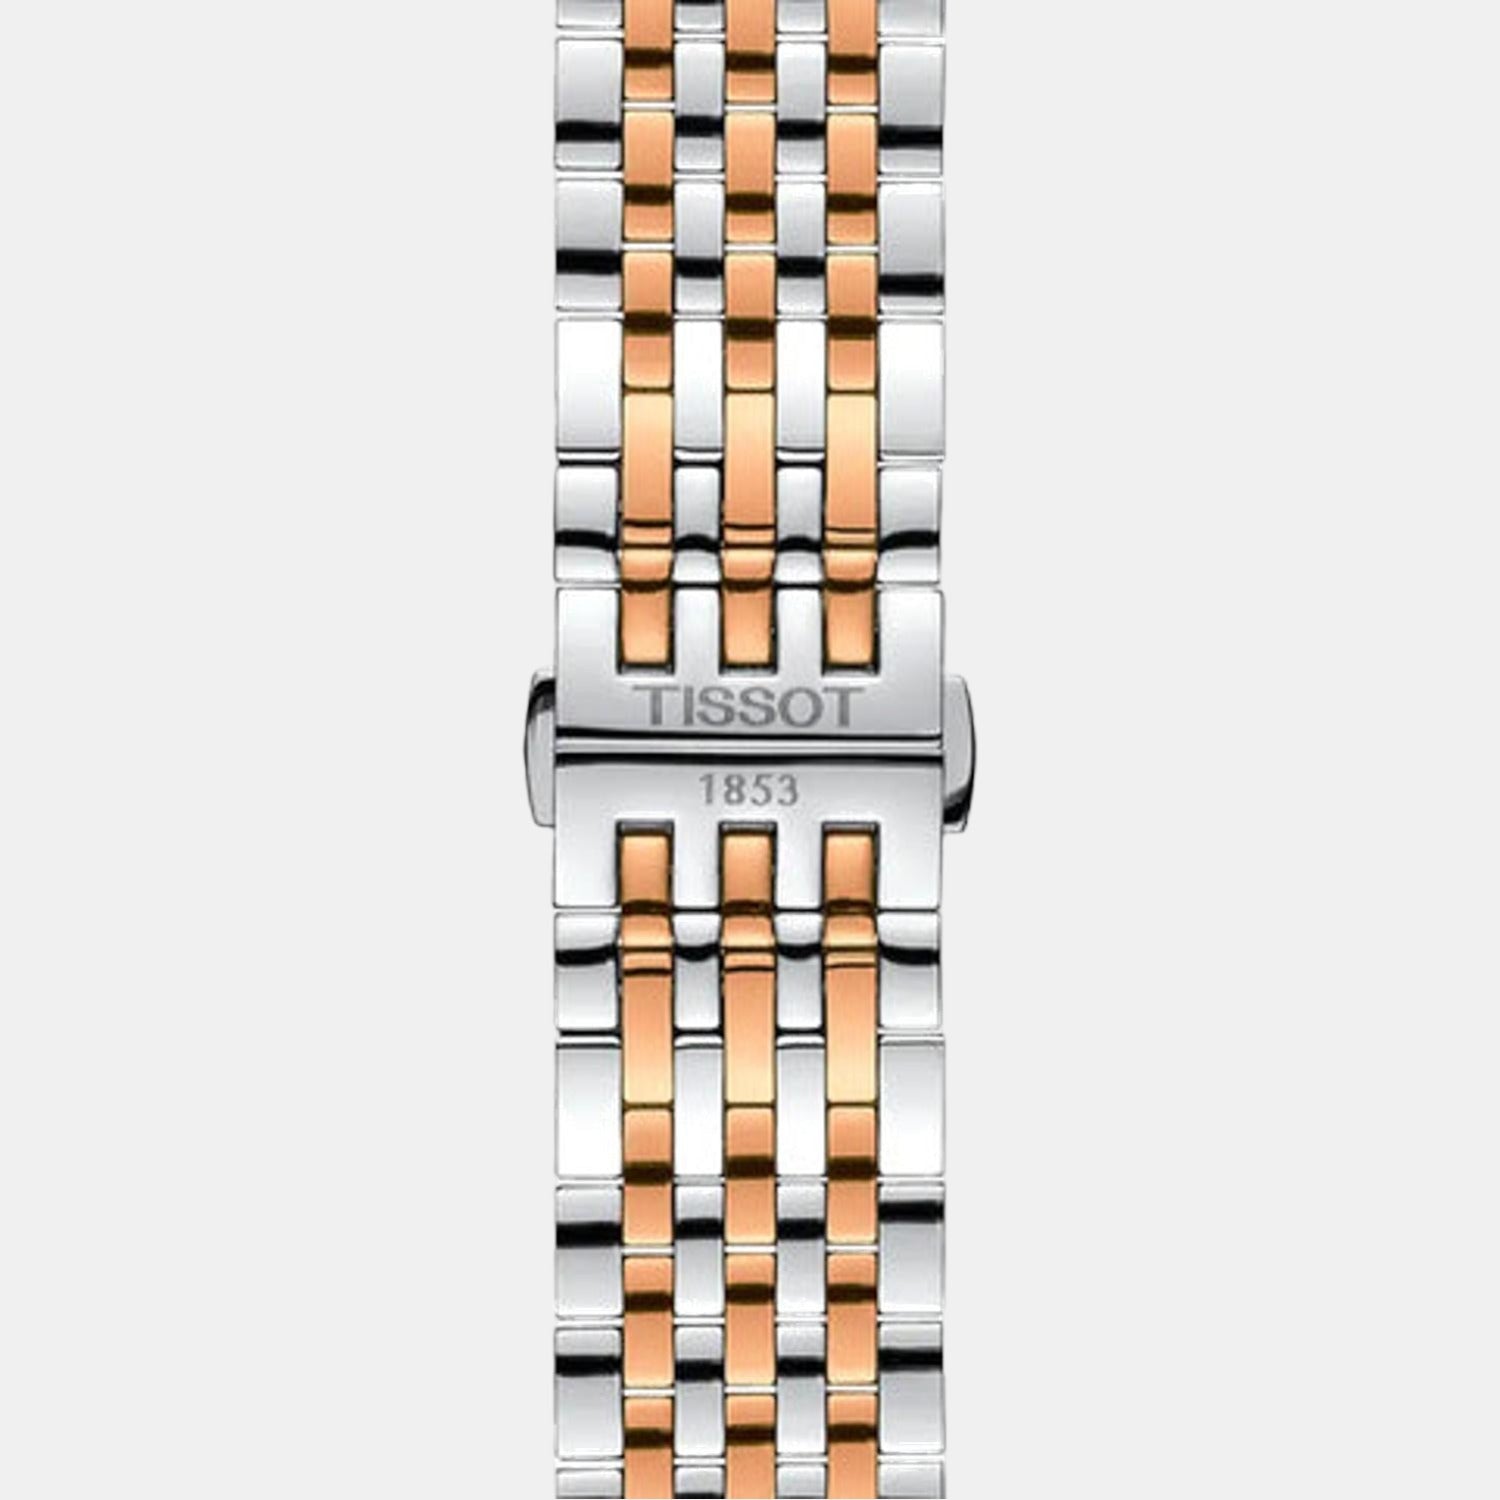 Ballade on steel bracelet vs orange leather with contrast stitching - which  one? : r/tissot